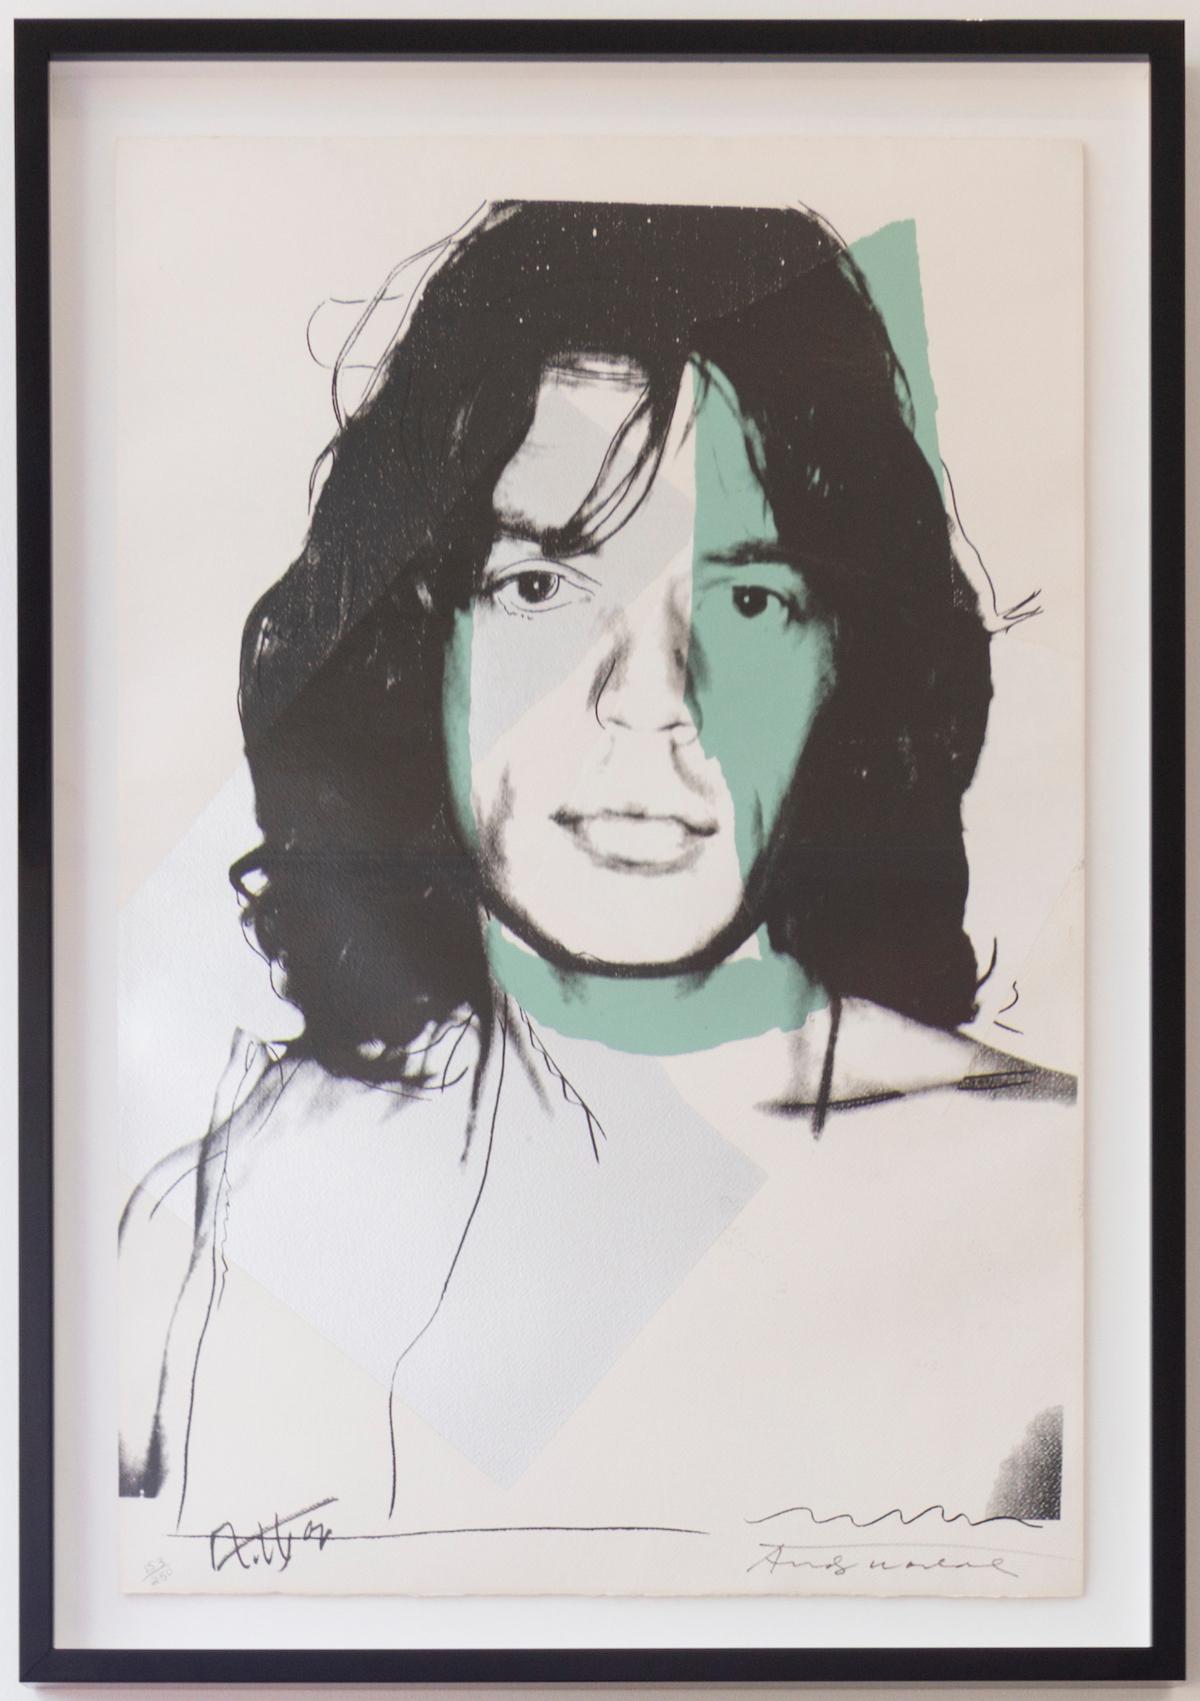 From the regular edition of 250. The specific edition number will only be provided to the buyer at the actual point of sale. Please message us to request this information at the point of purchase.

Andy Warhol created his Mick Jagger portfolio while